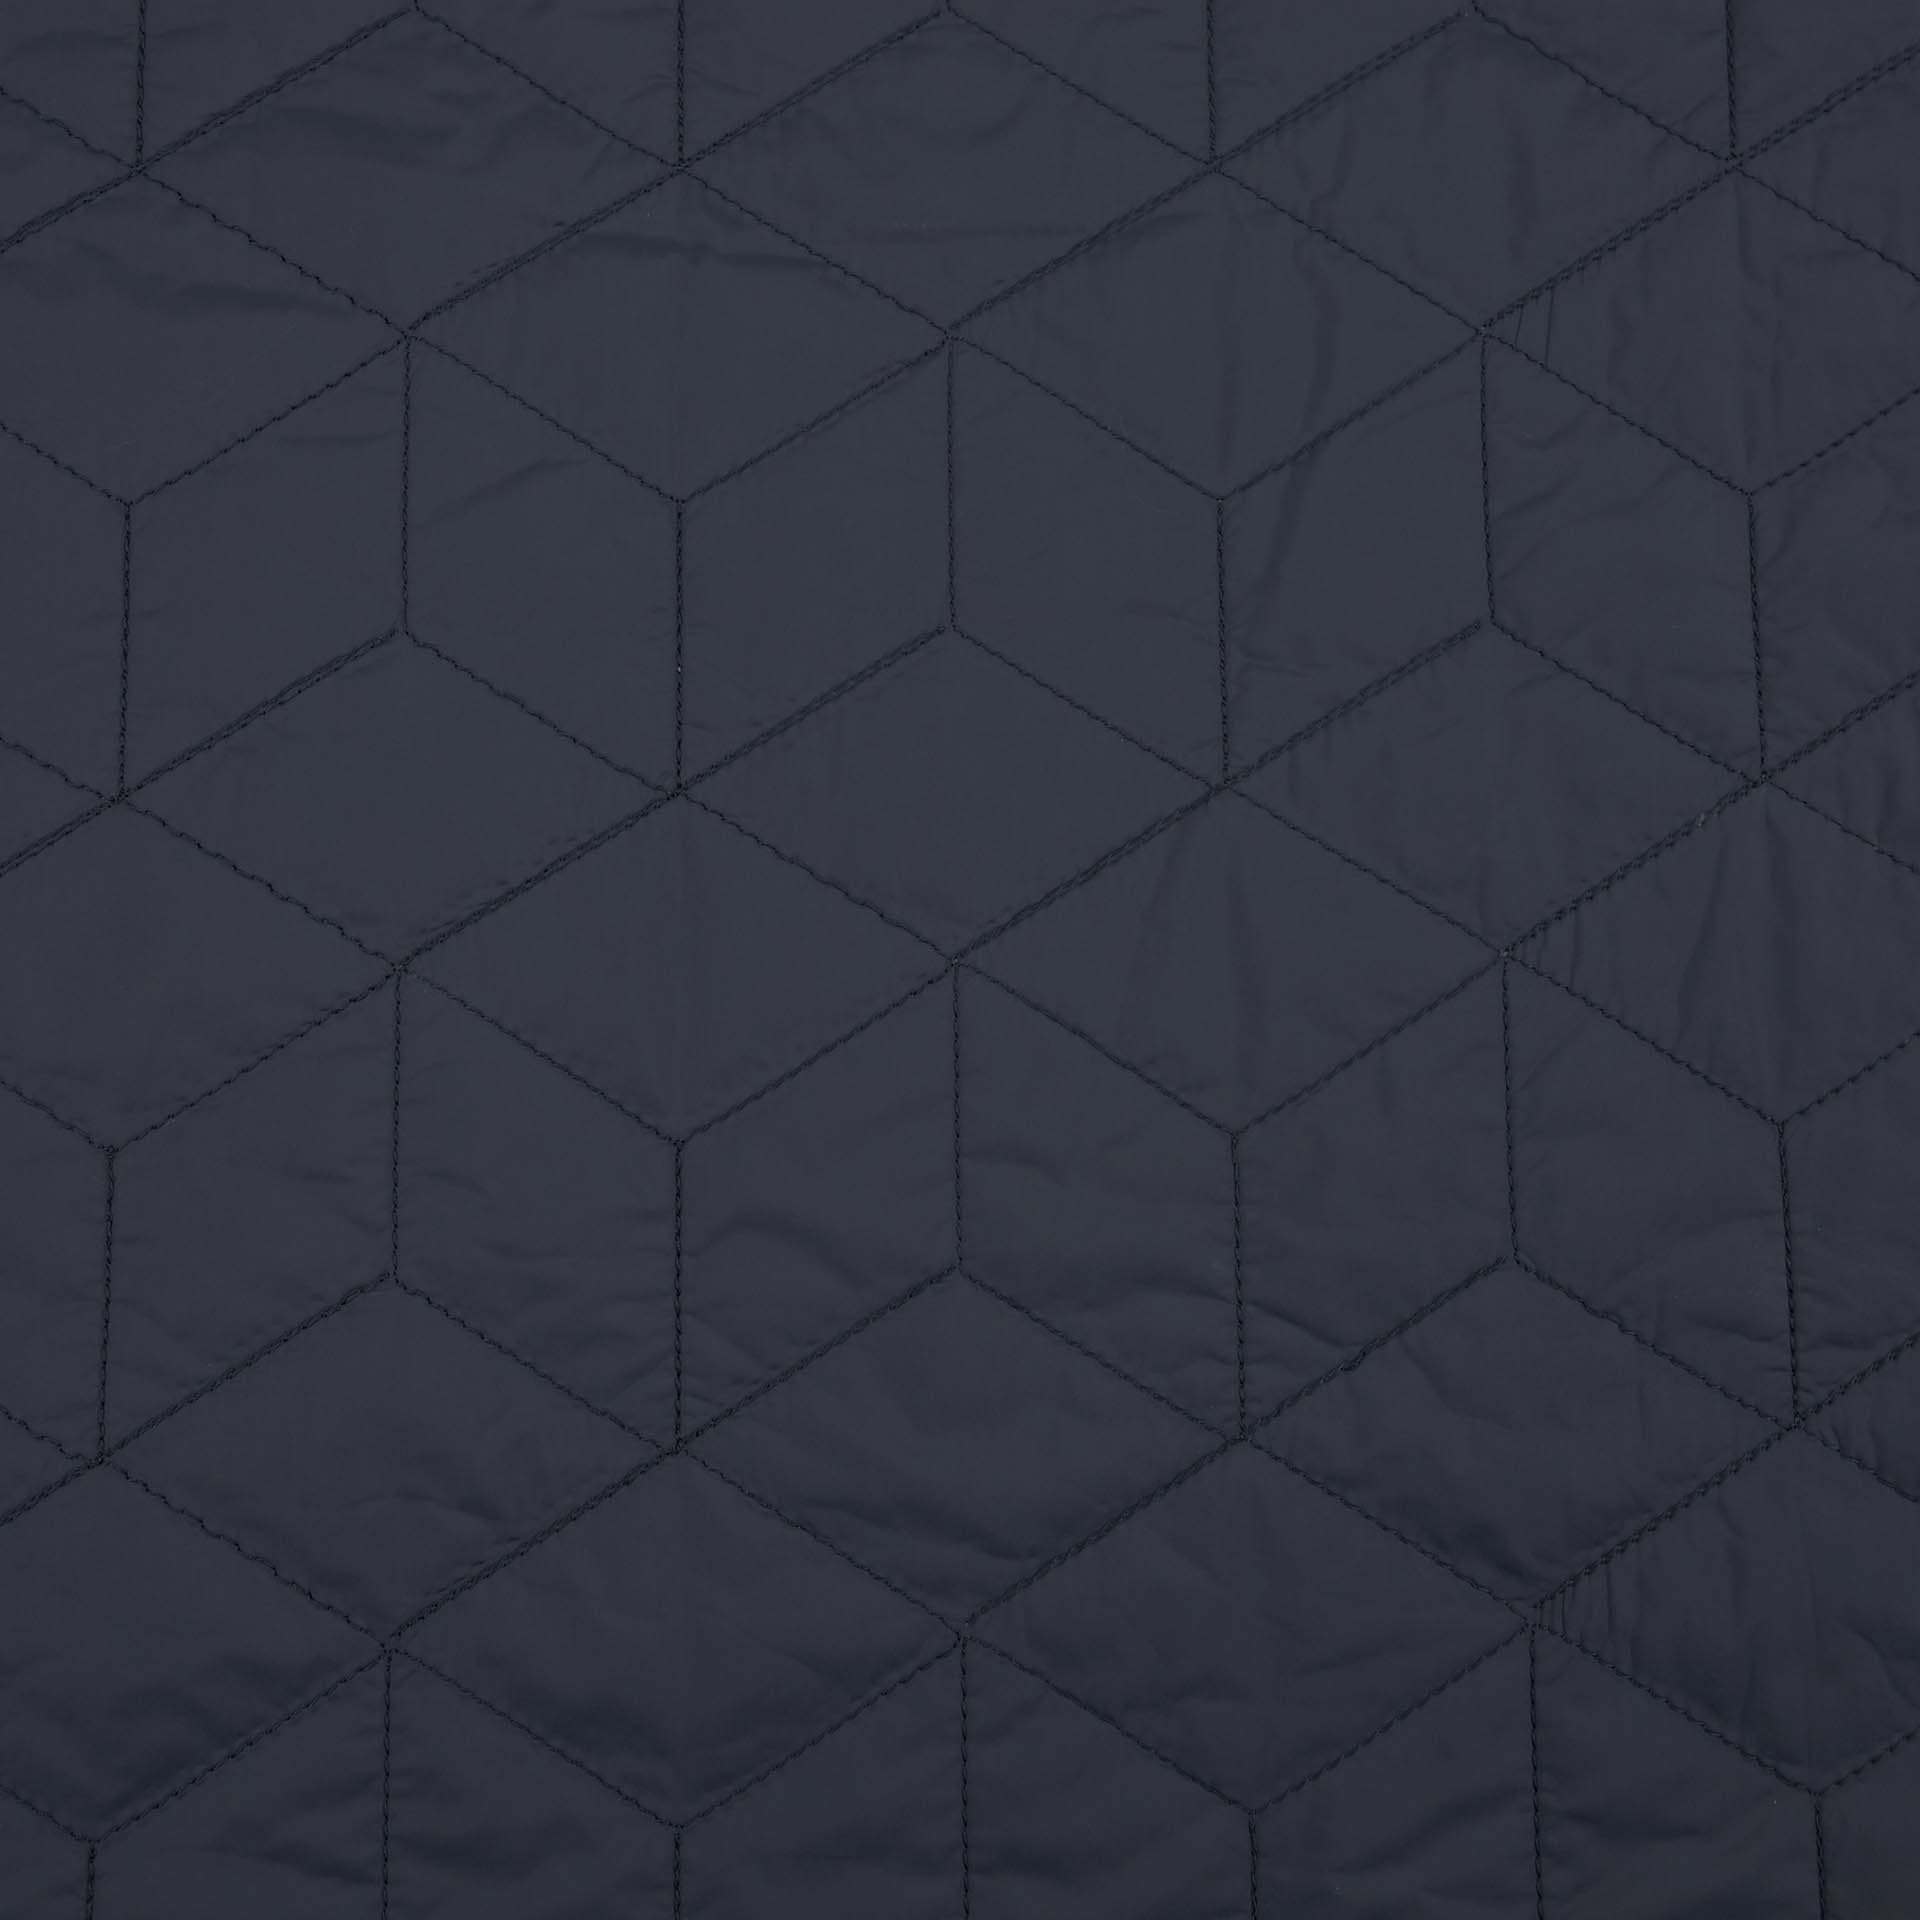 Navy Quilted Fabric 4569